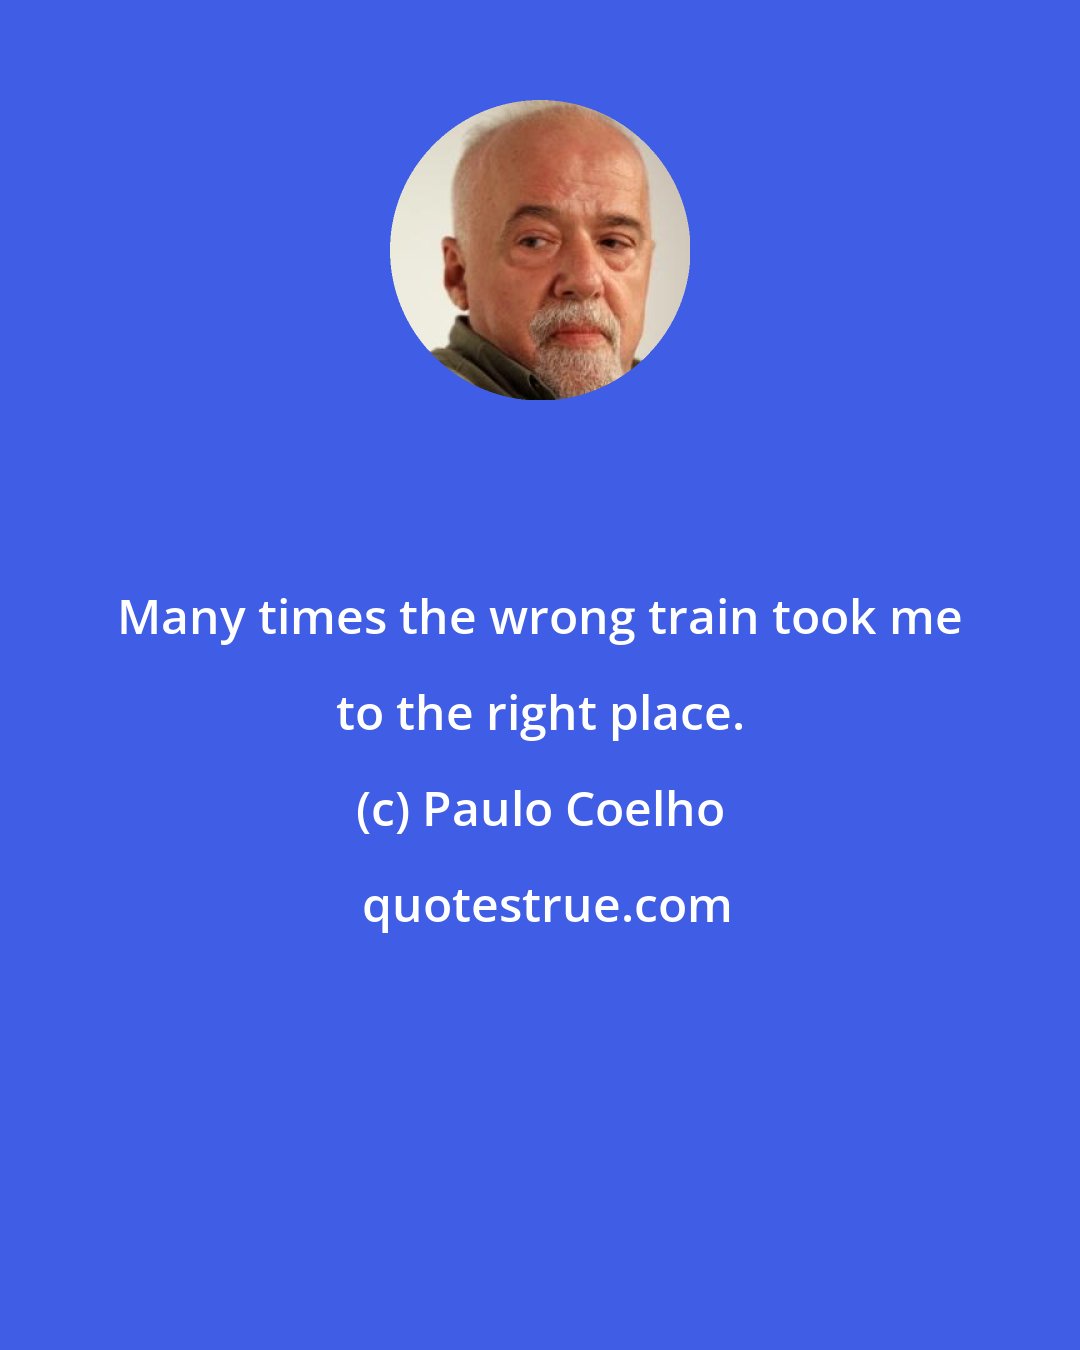 Paulo Coelho: Many times the wrong train took me to the right place.